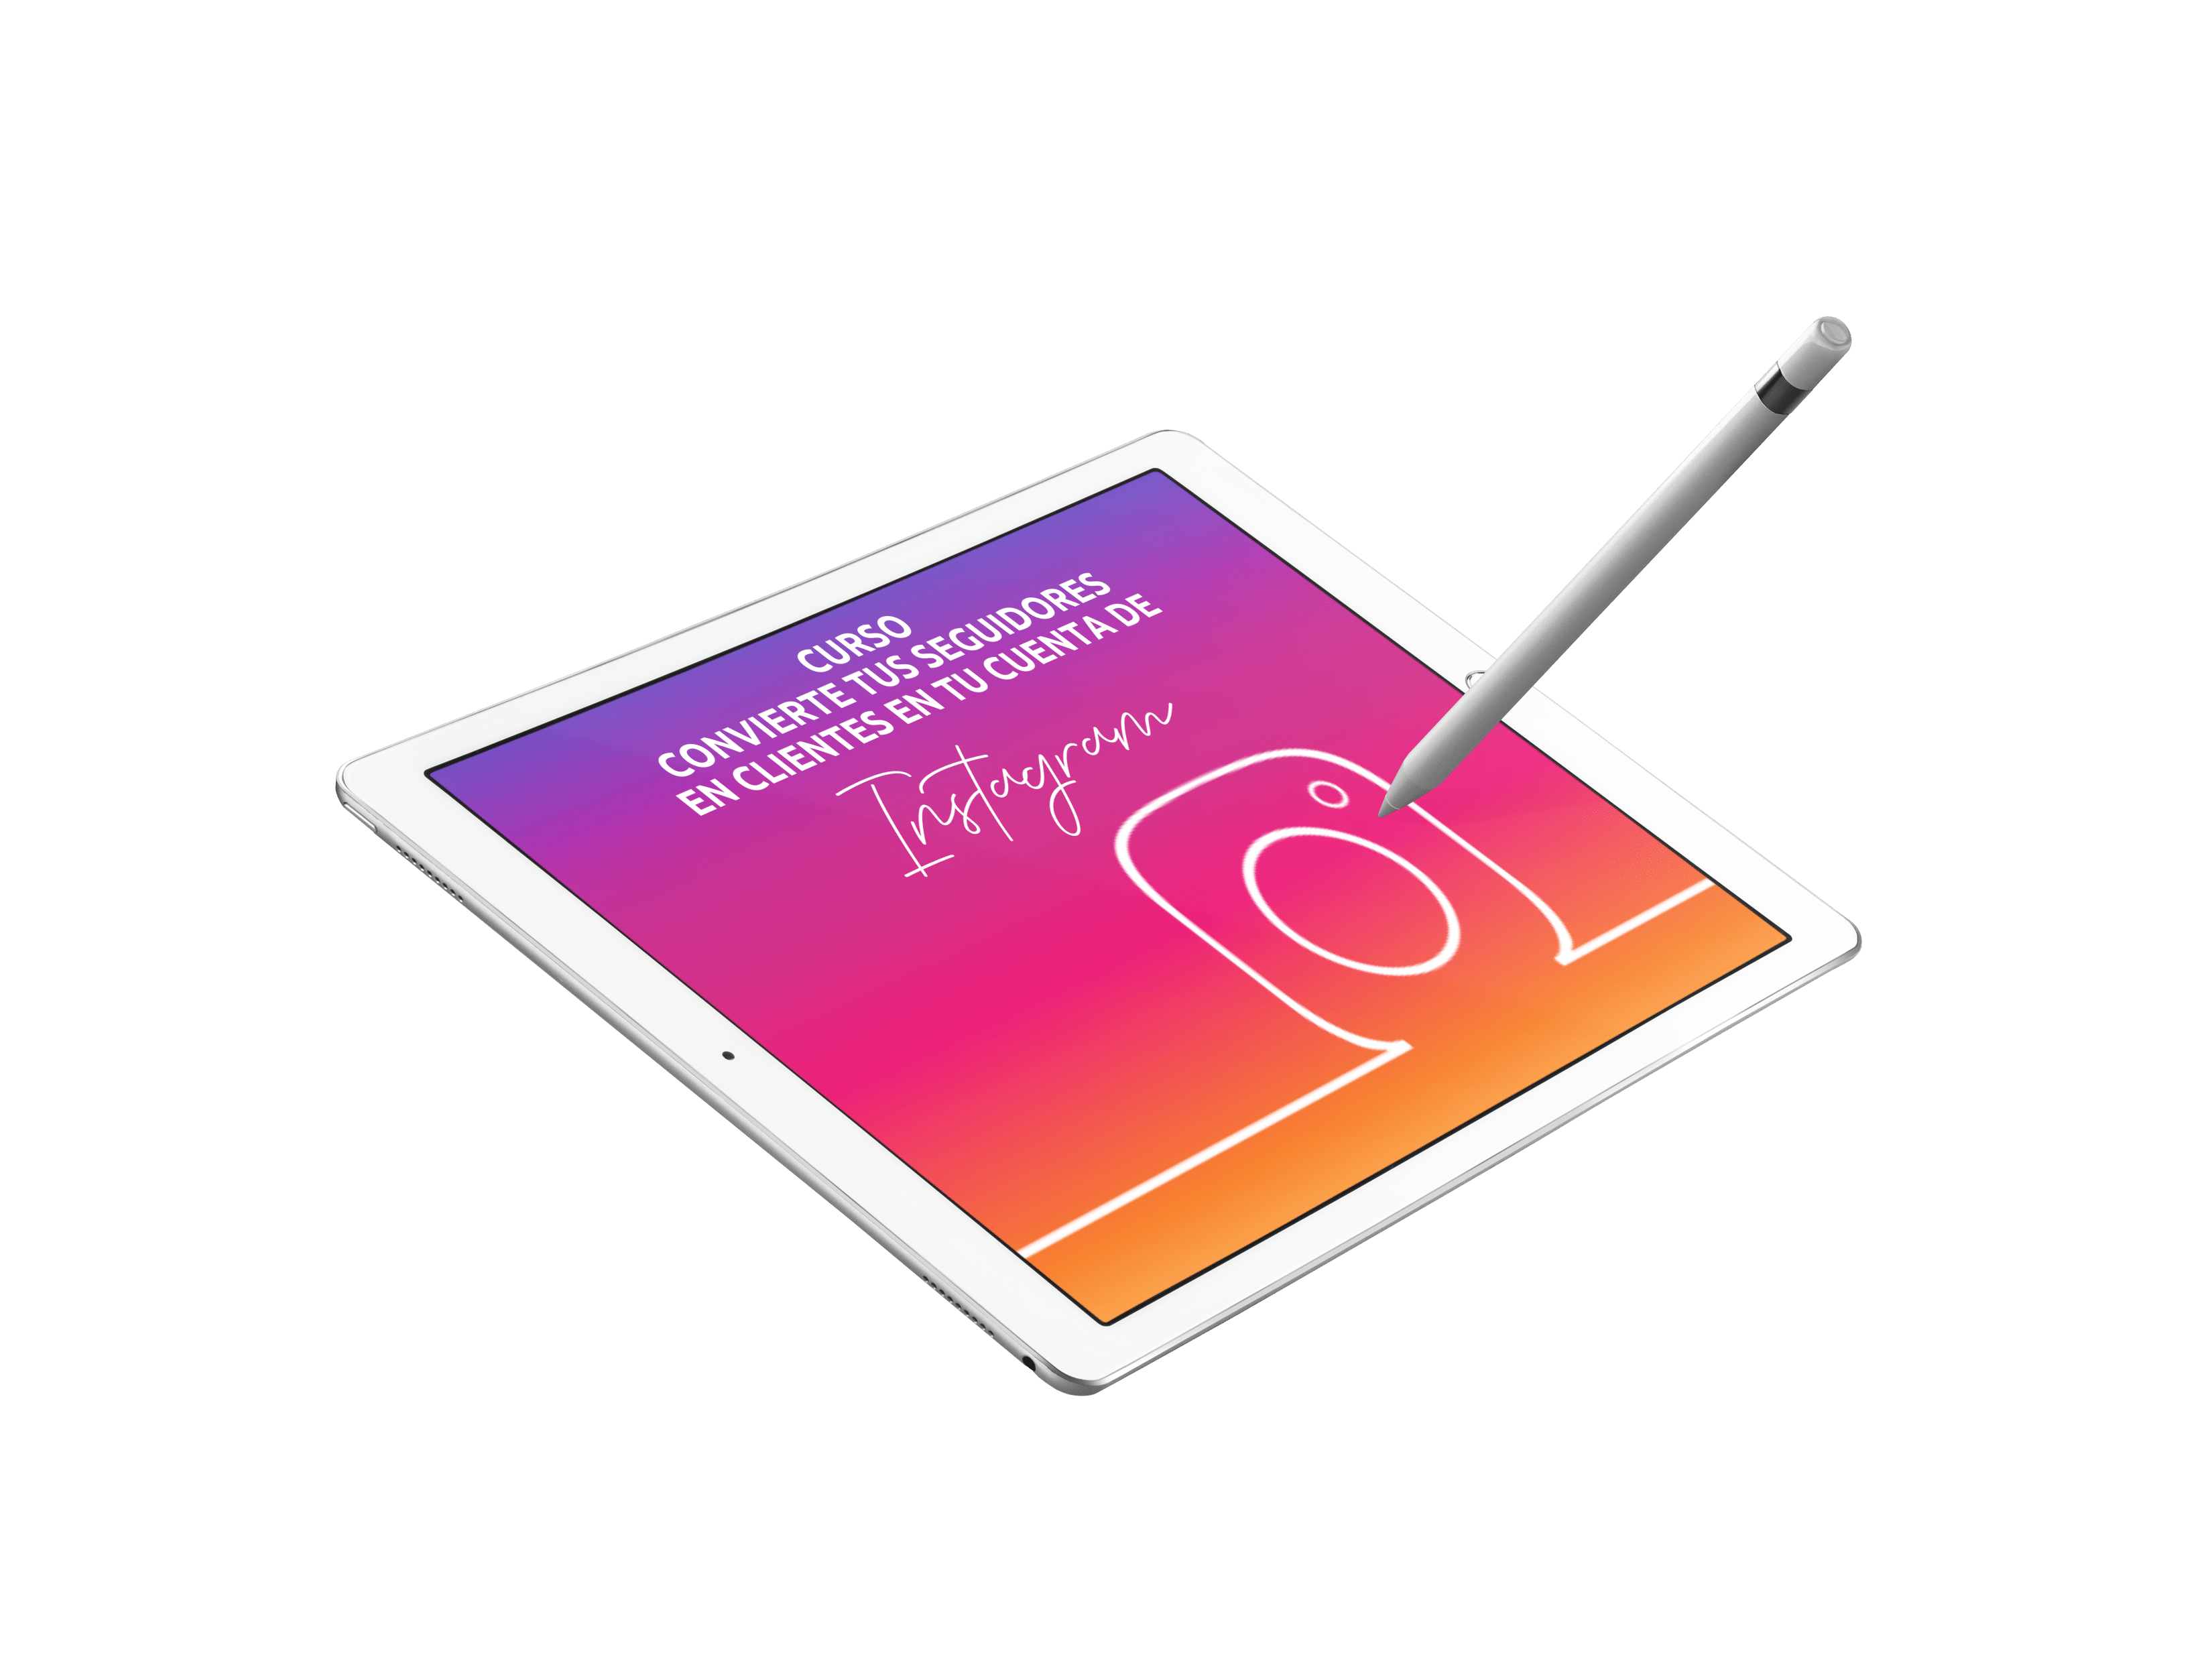 Download ipad-9-7-mockup-with-transparent-background-a20174 (1) | Soy Carito Ruiz